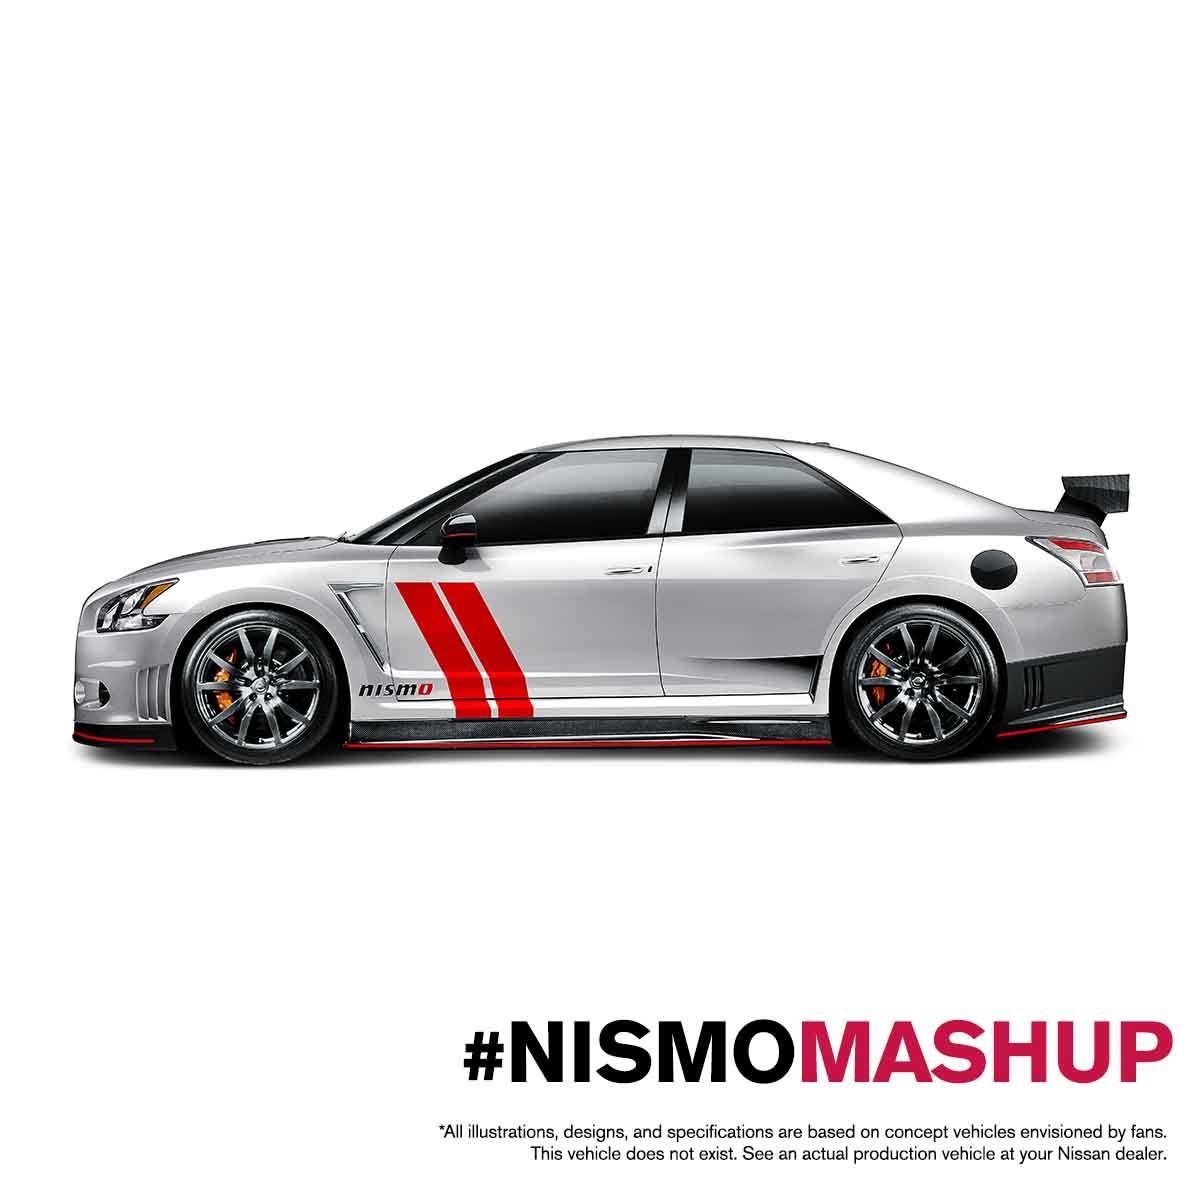 Nissan drawing competition #6